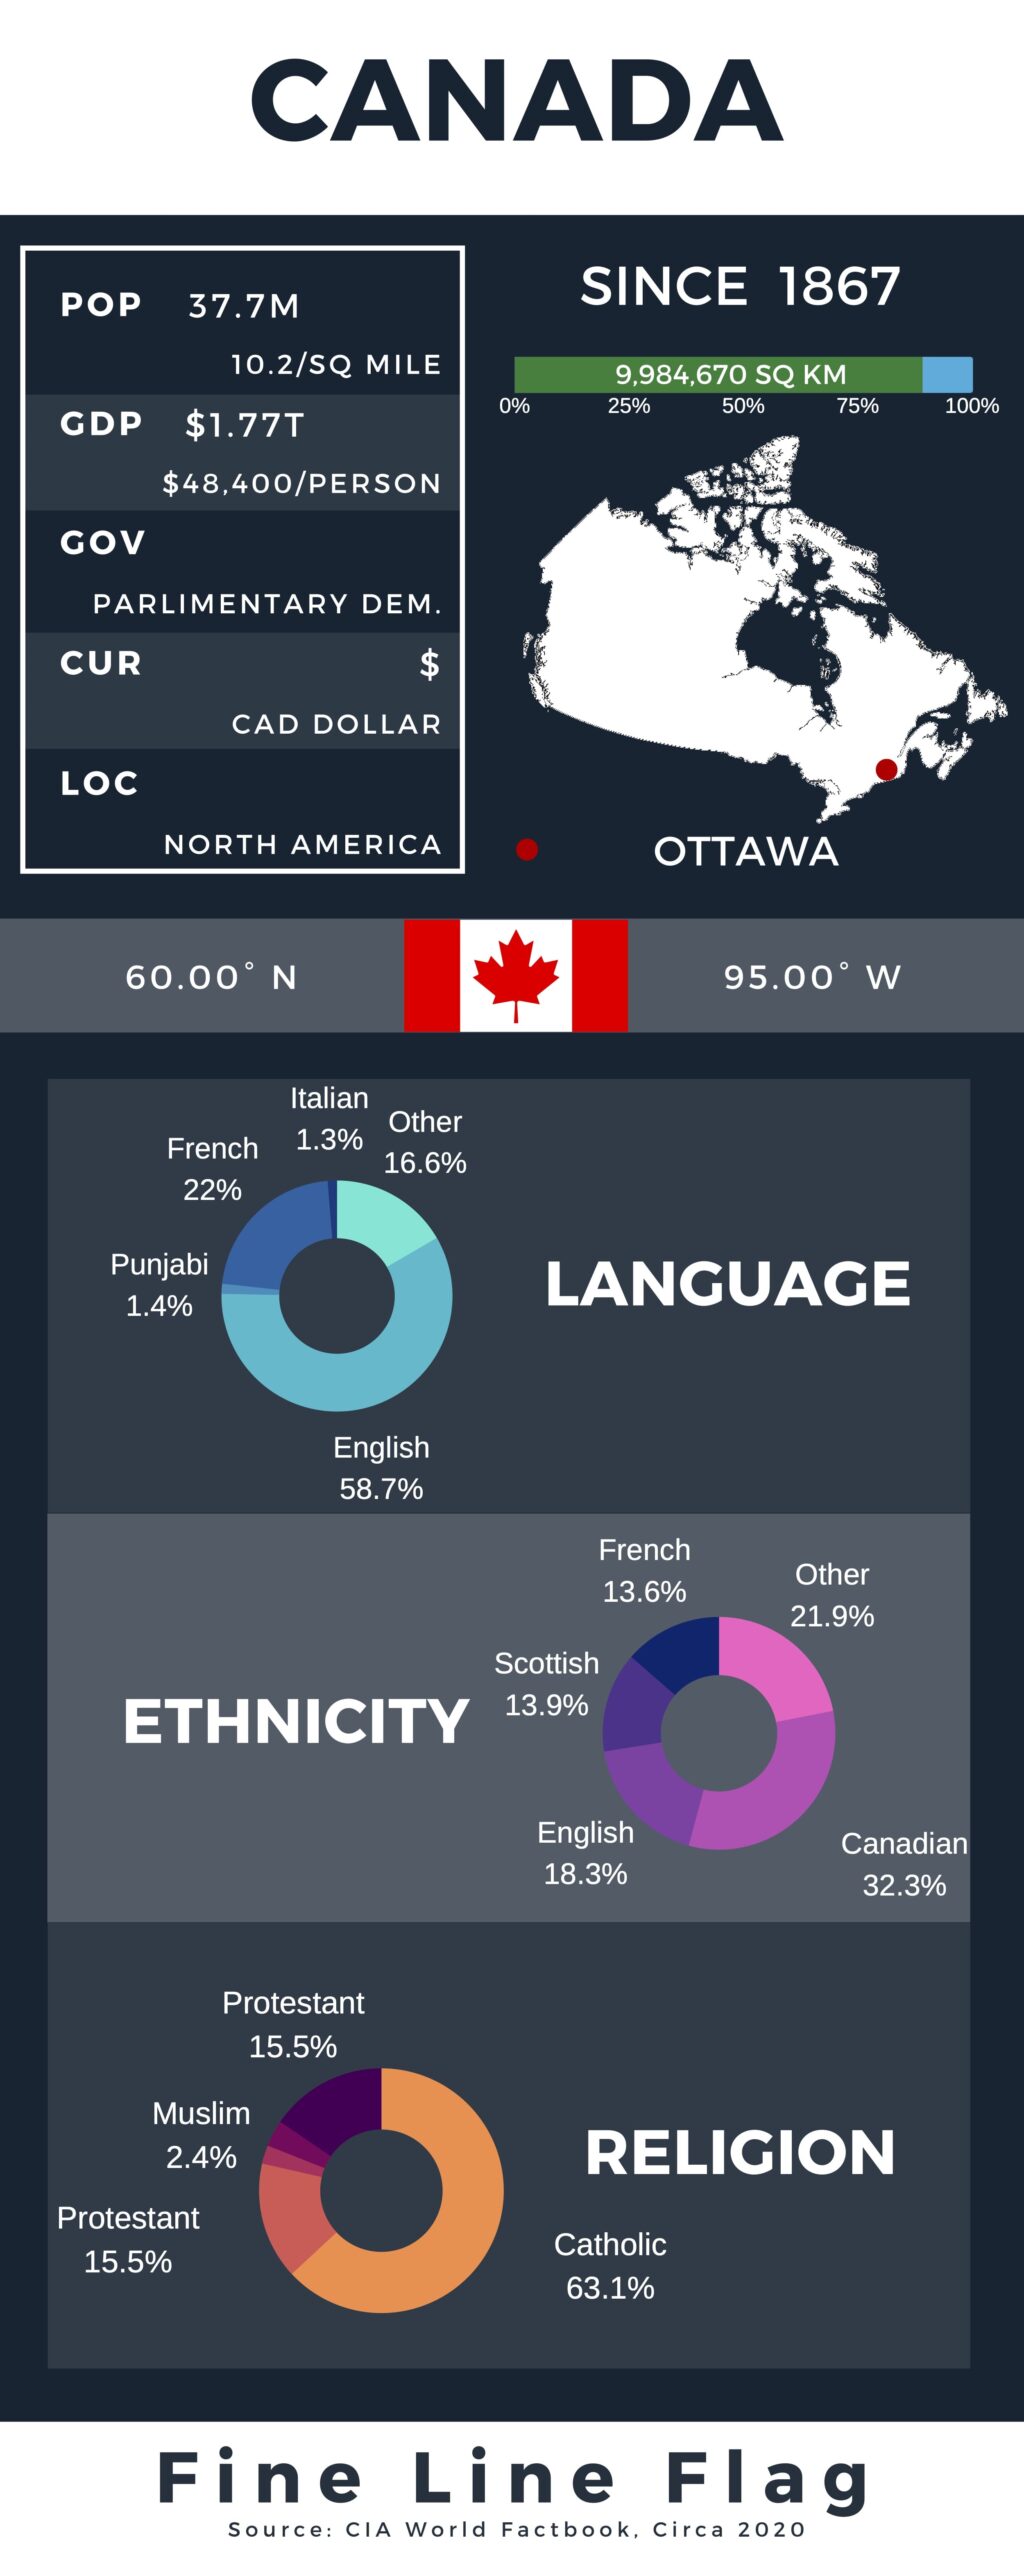 Canada Profile Infographic with statistics on government and people